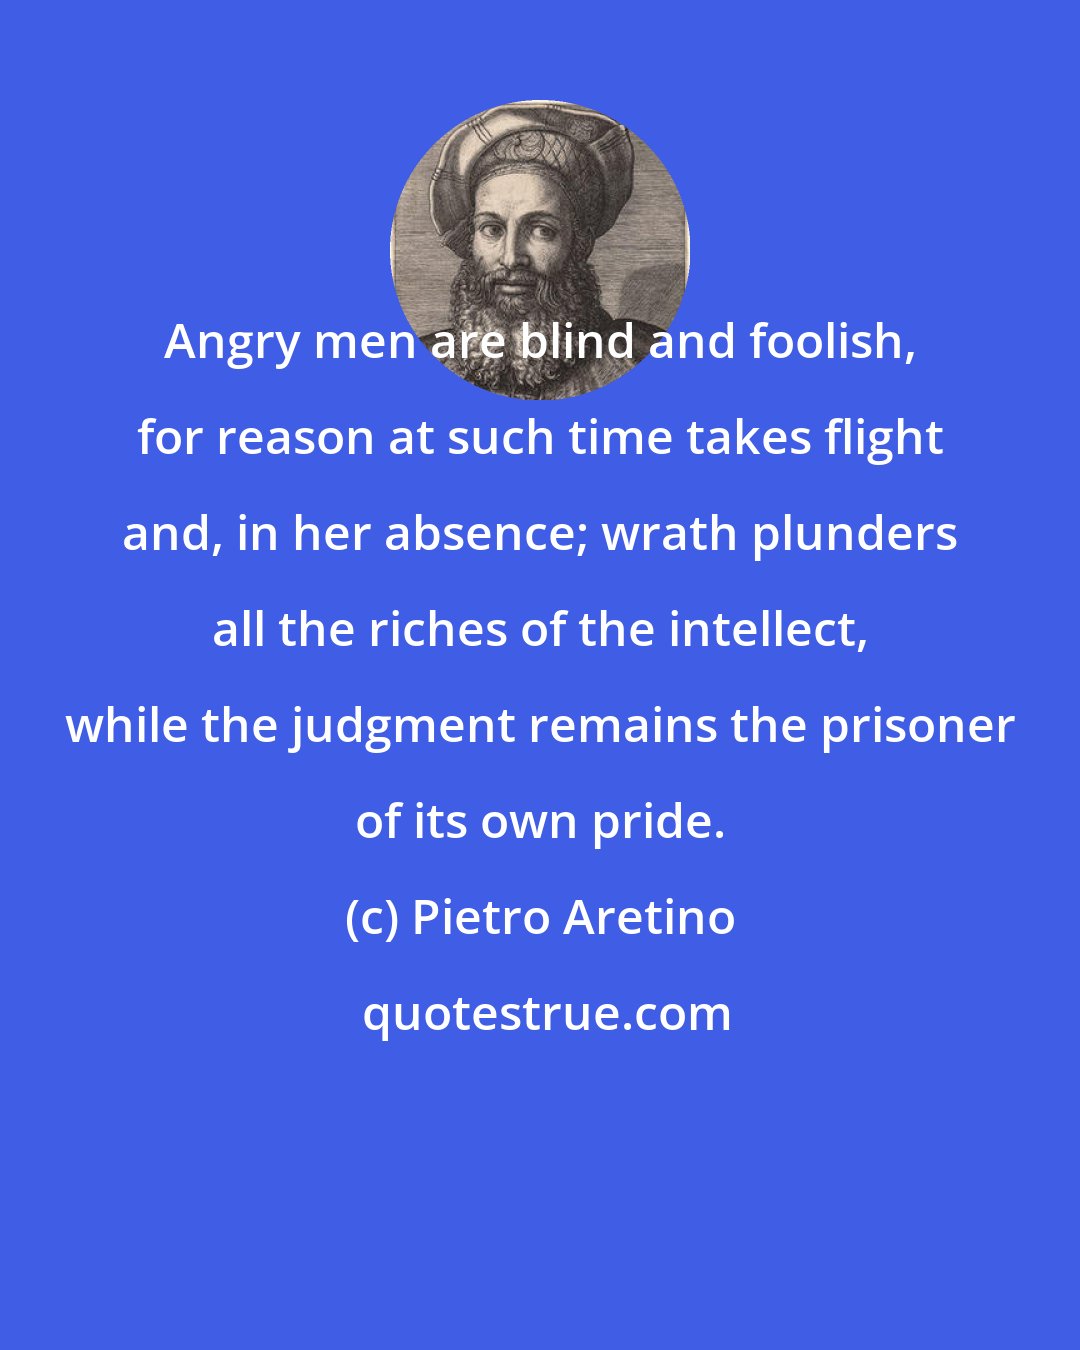 Pietro Aretino: Angry men are blind and foolish, for reason at such time takes flight and, in her absence; wrath plunders all the riches of the intellect, while the judgment remains the prisoner of its own pride.